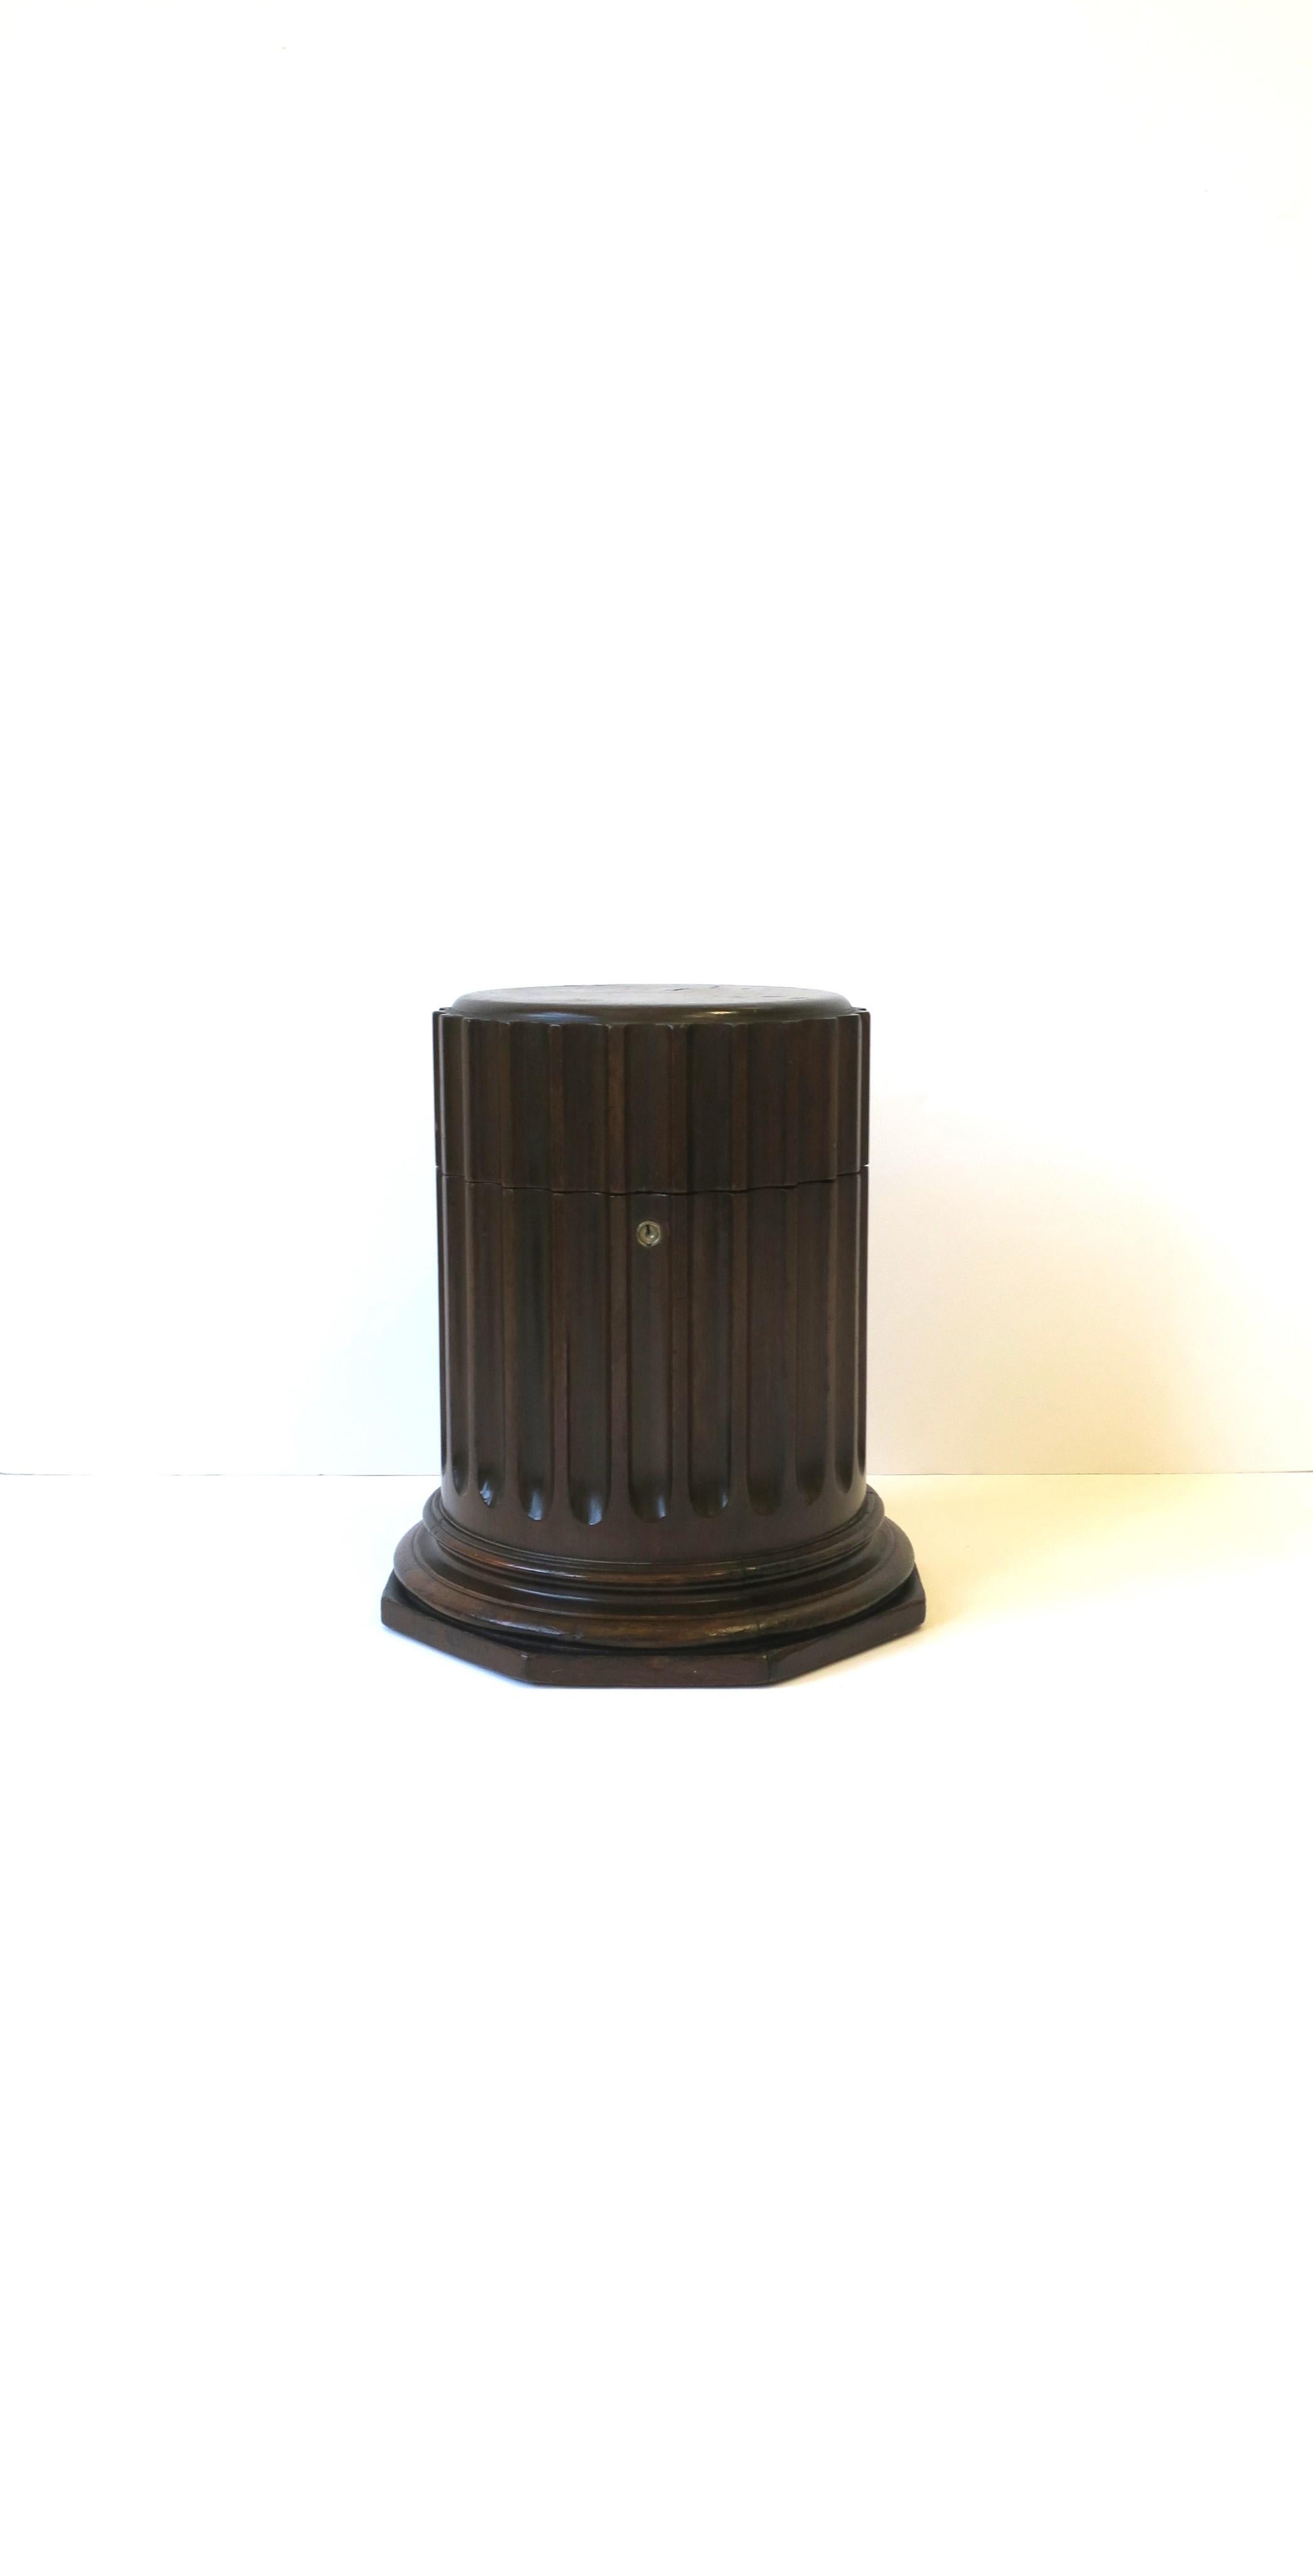 A beautiful column pedestal box in the neoclassical style, circa mid-20th century, USA. Piece is a rich dark brown wood with an octagonal base and fluted pillar. Box opens to an inside area that's also octagonal in shape with a Kelly-green hue. A